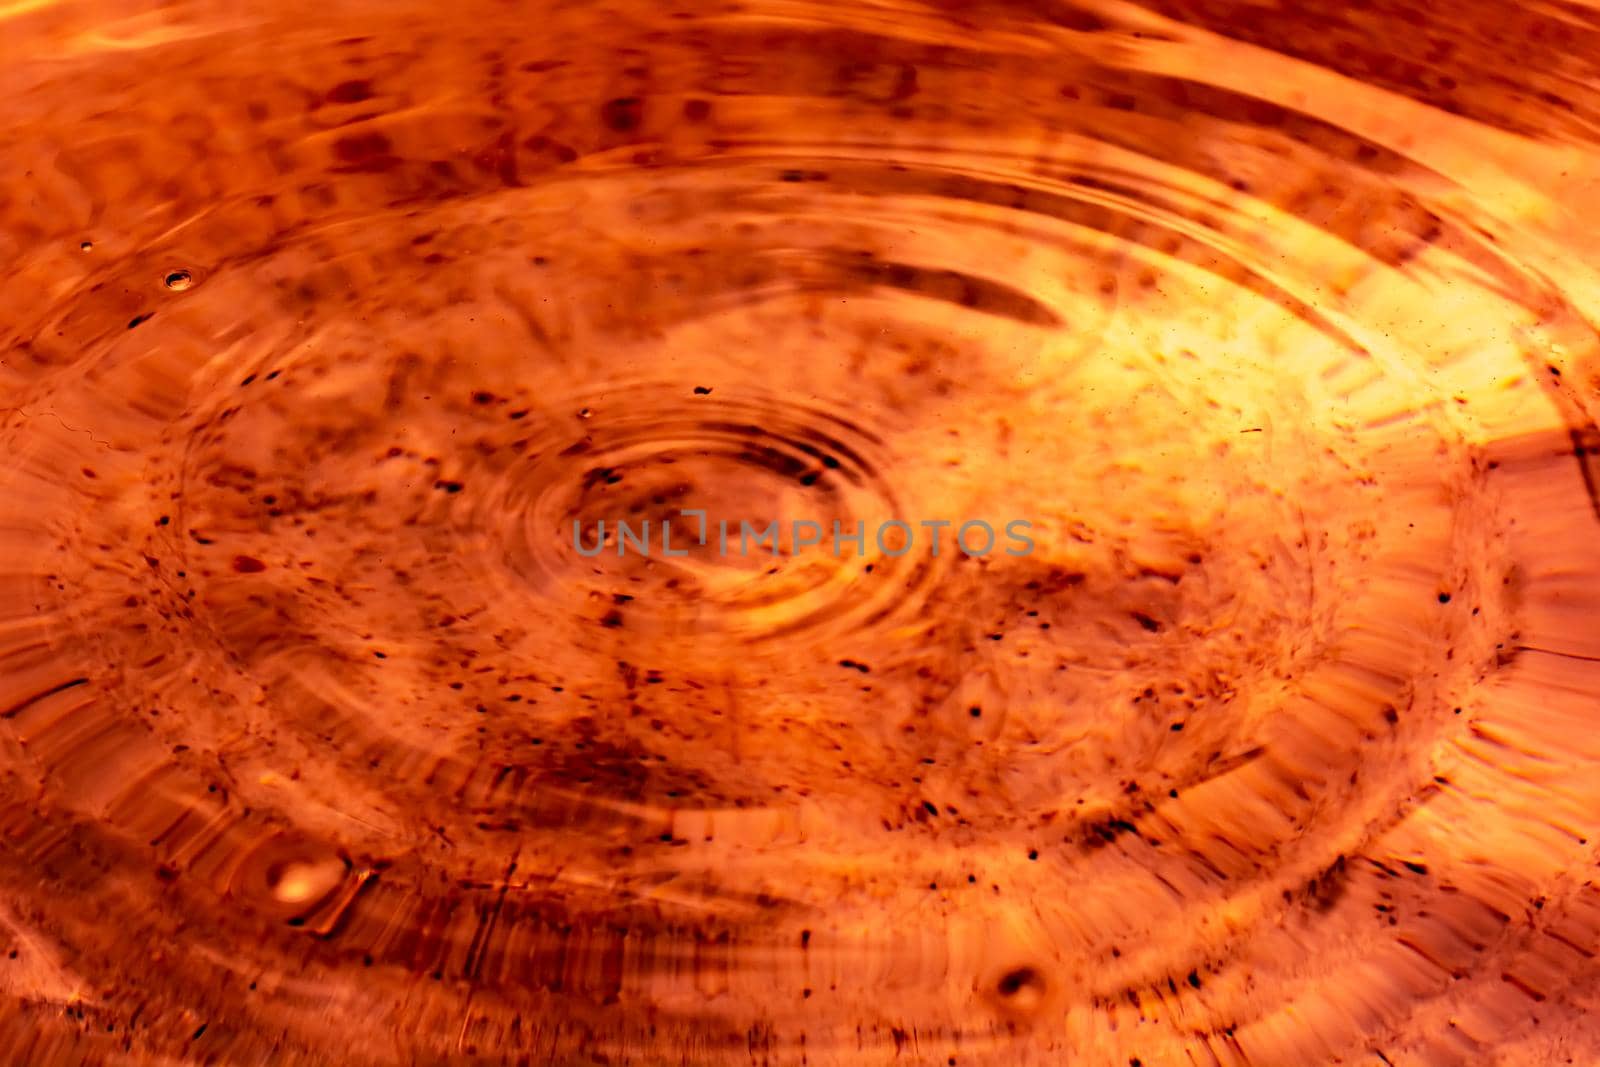 Circles and small ripples on orange-brown liquid. Backdrop